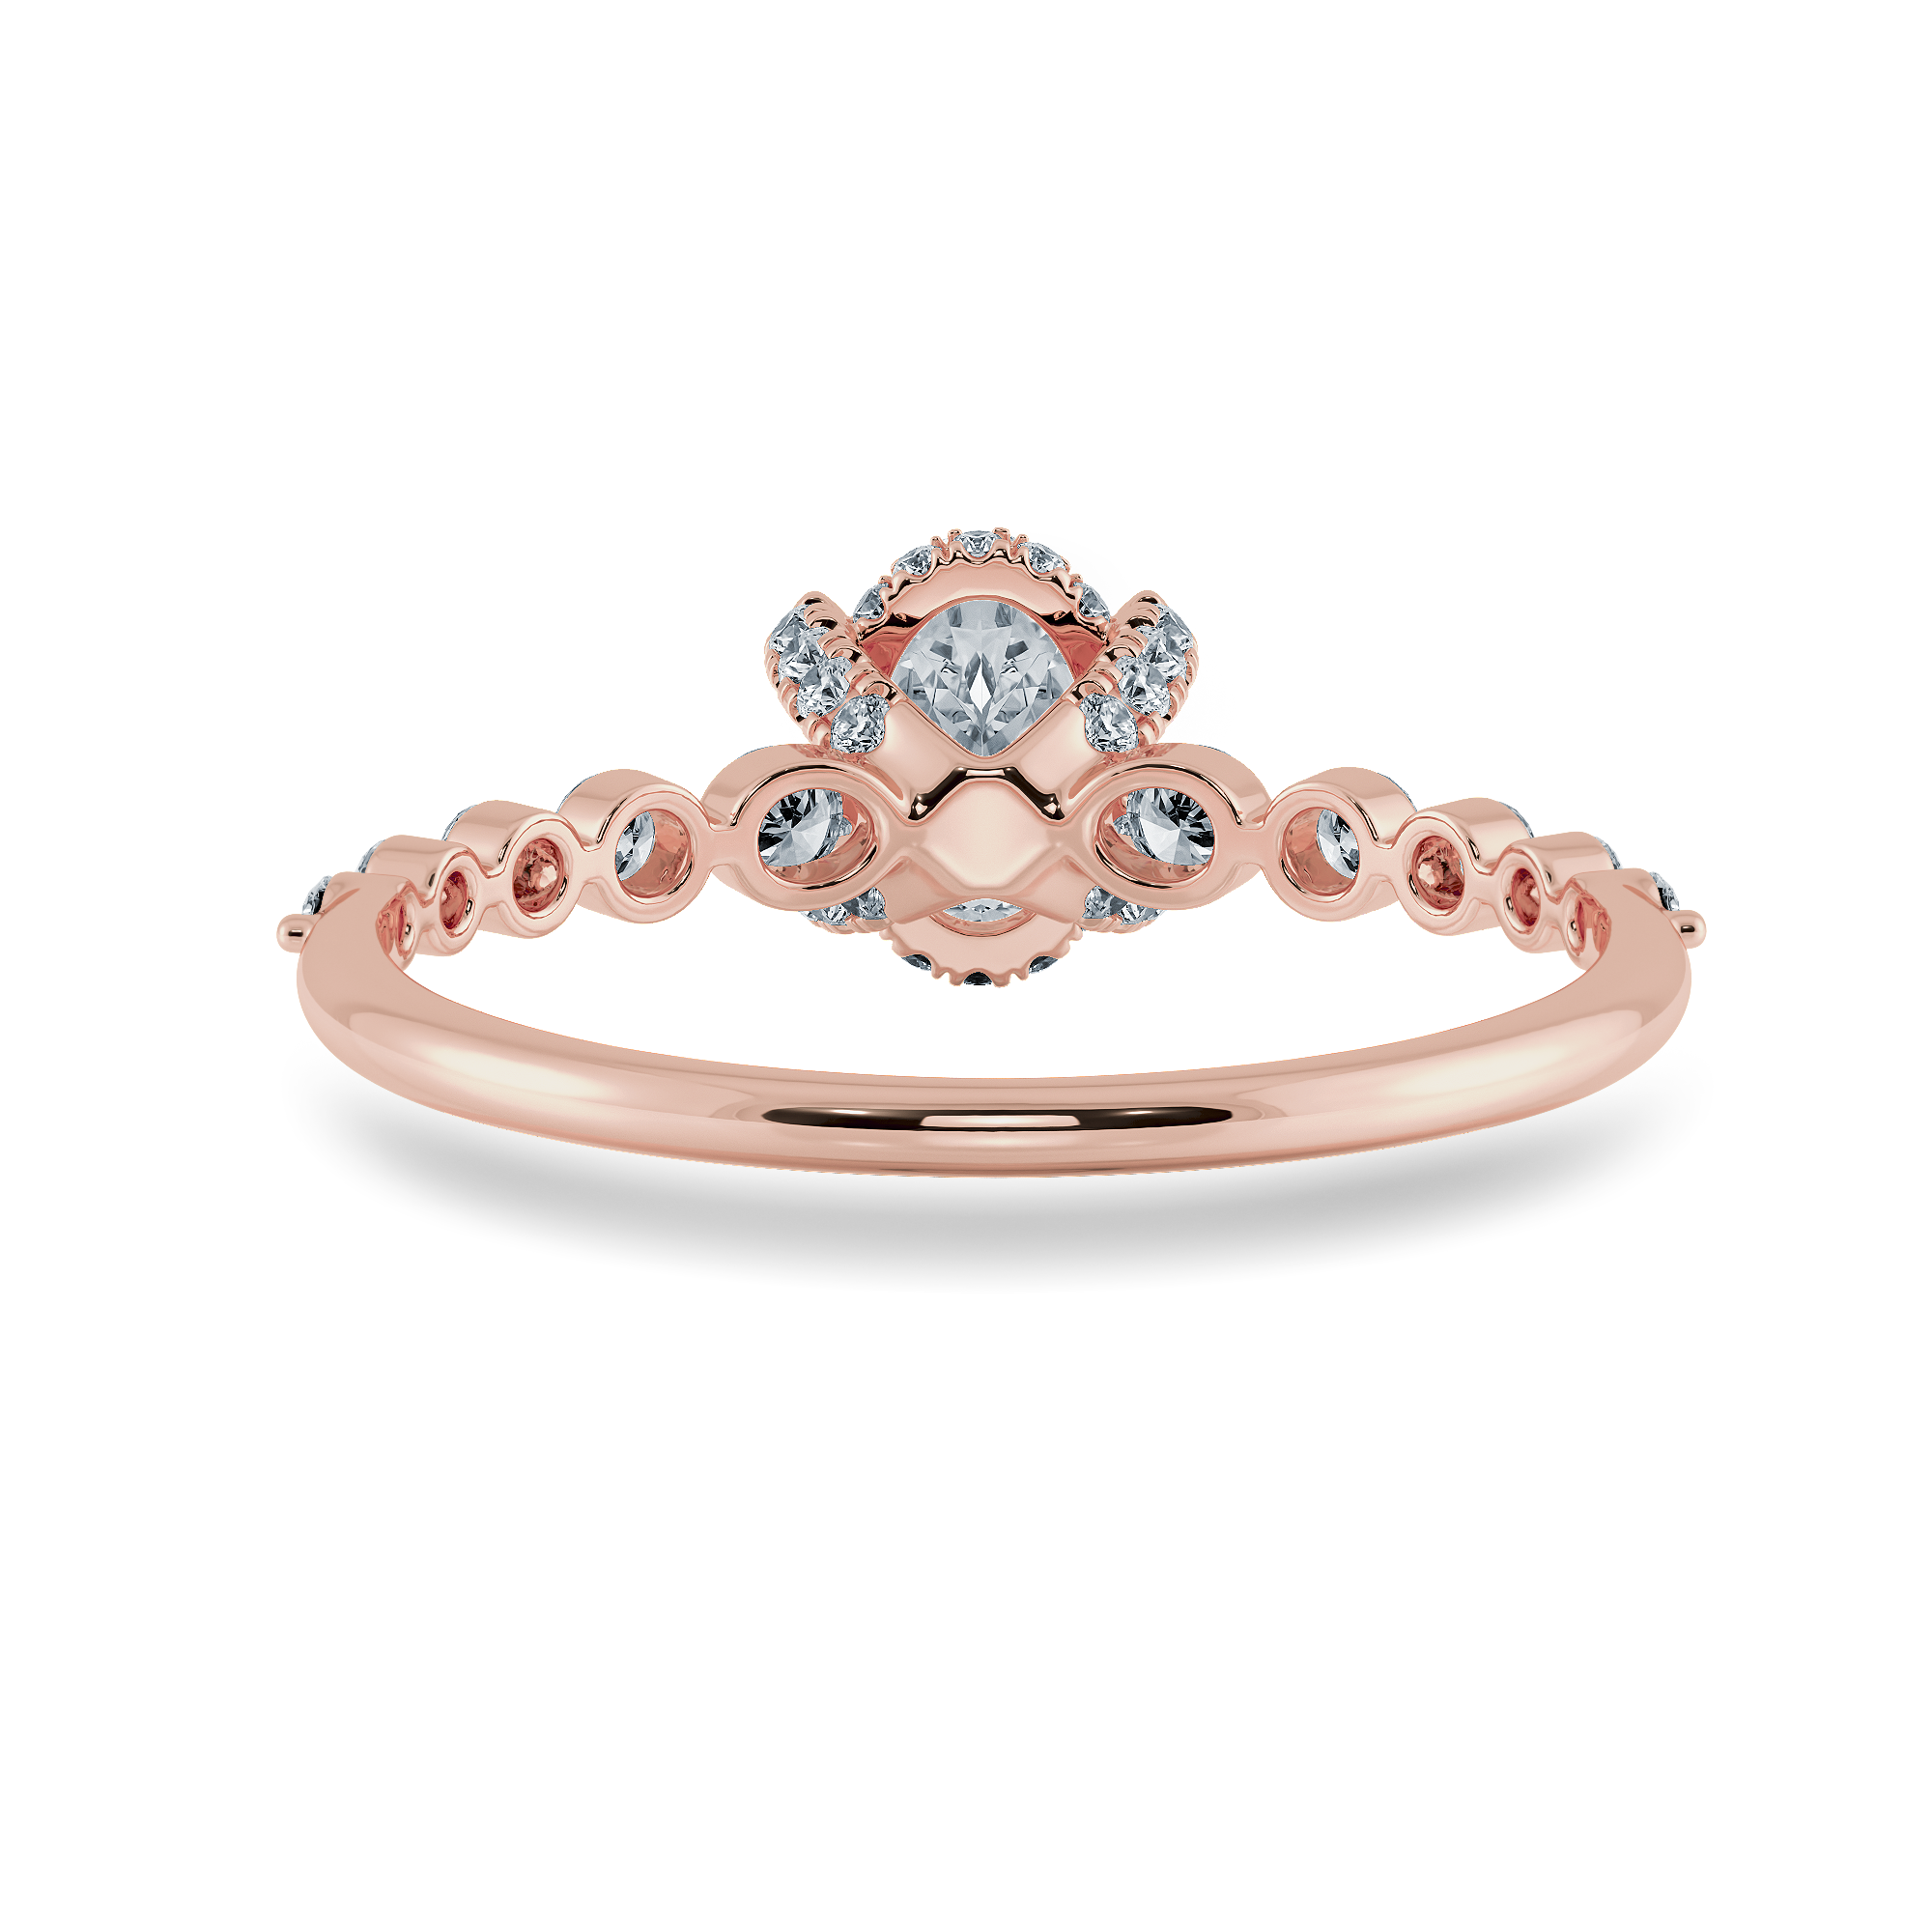 0.30 cts. Oval Cut Solitaire Halo Diamond Accents 18K Rose Gold Ring JL AU 2008R   Jewelove.US